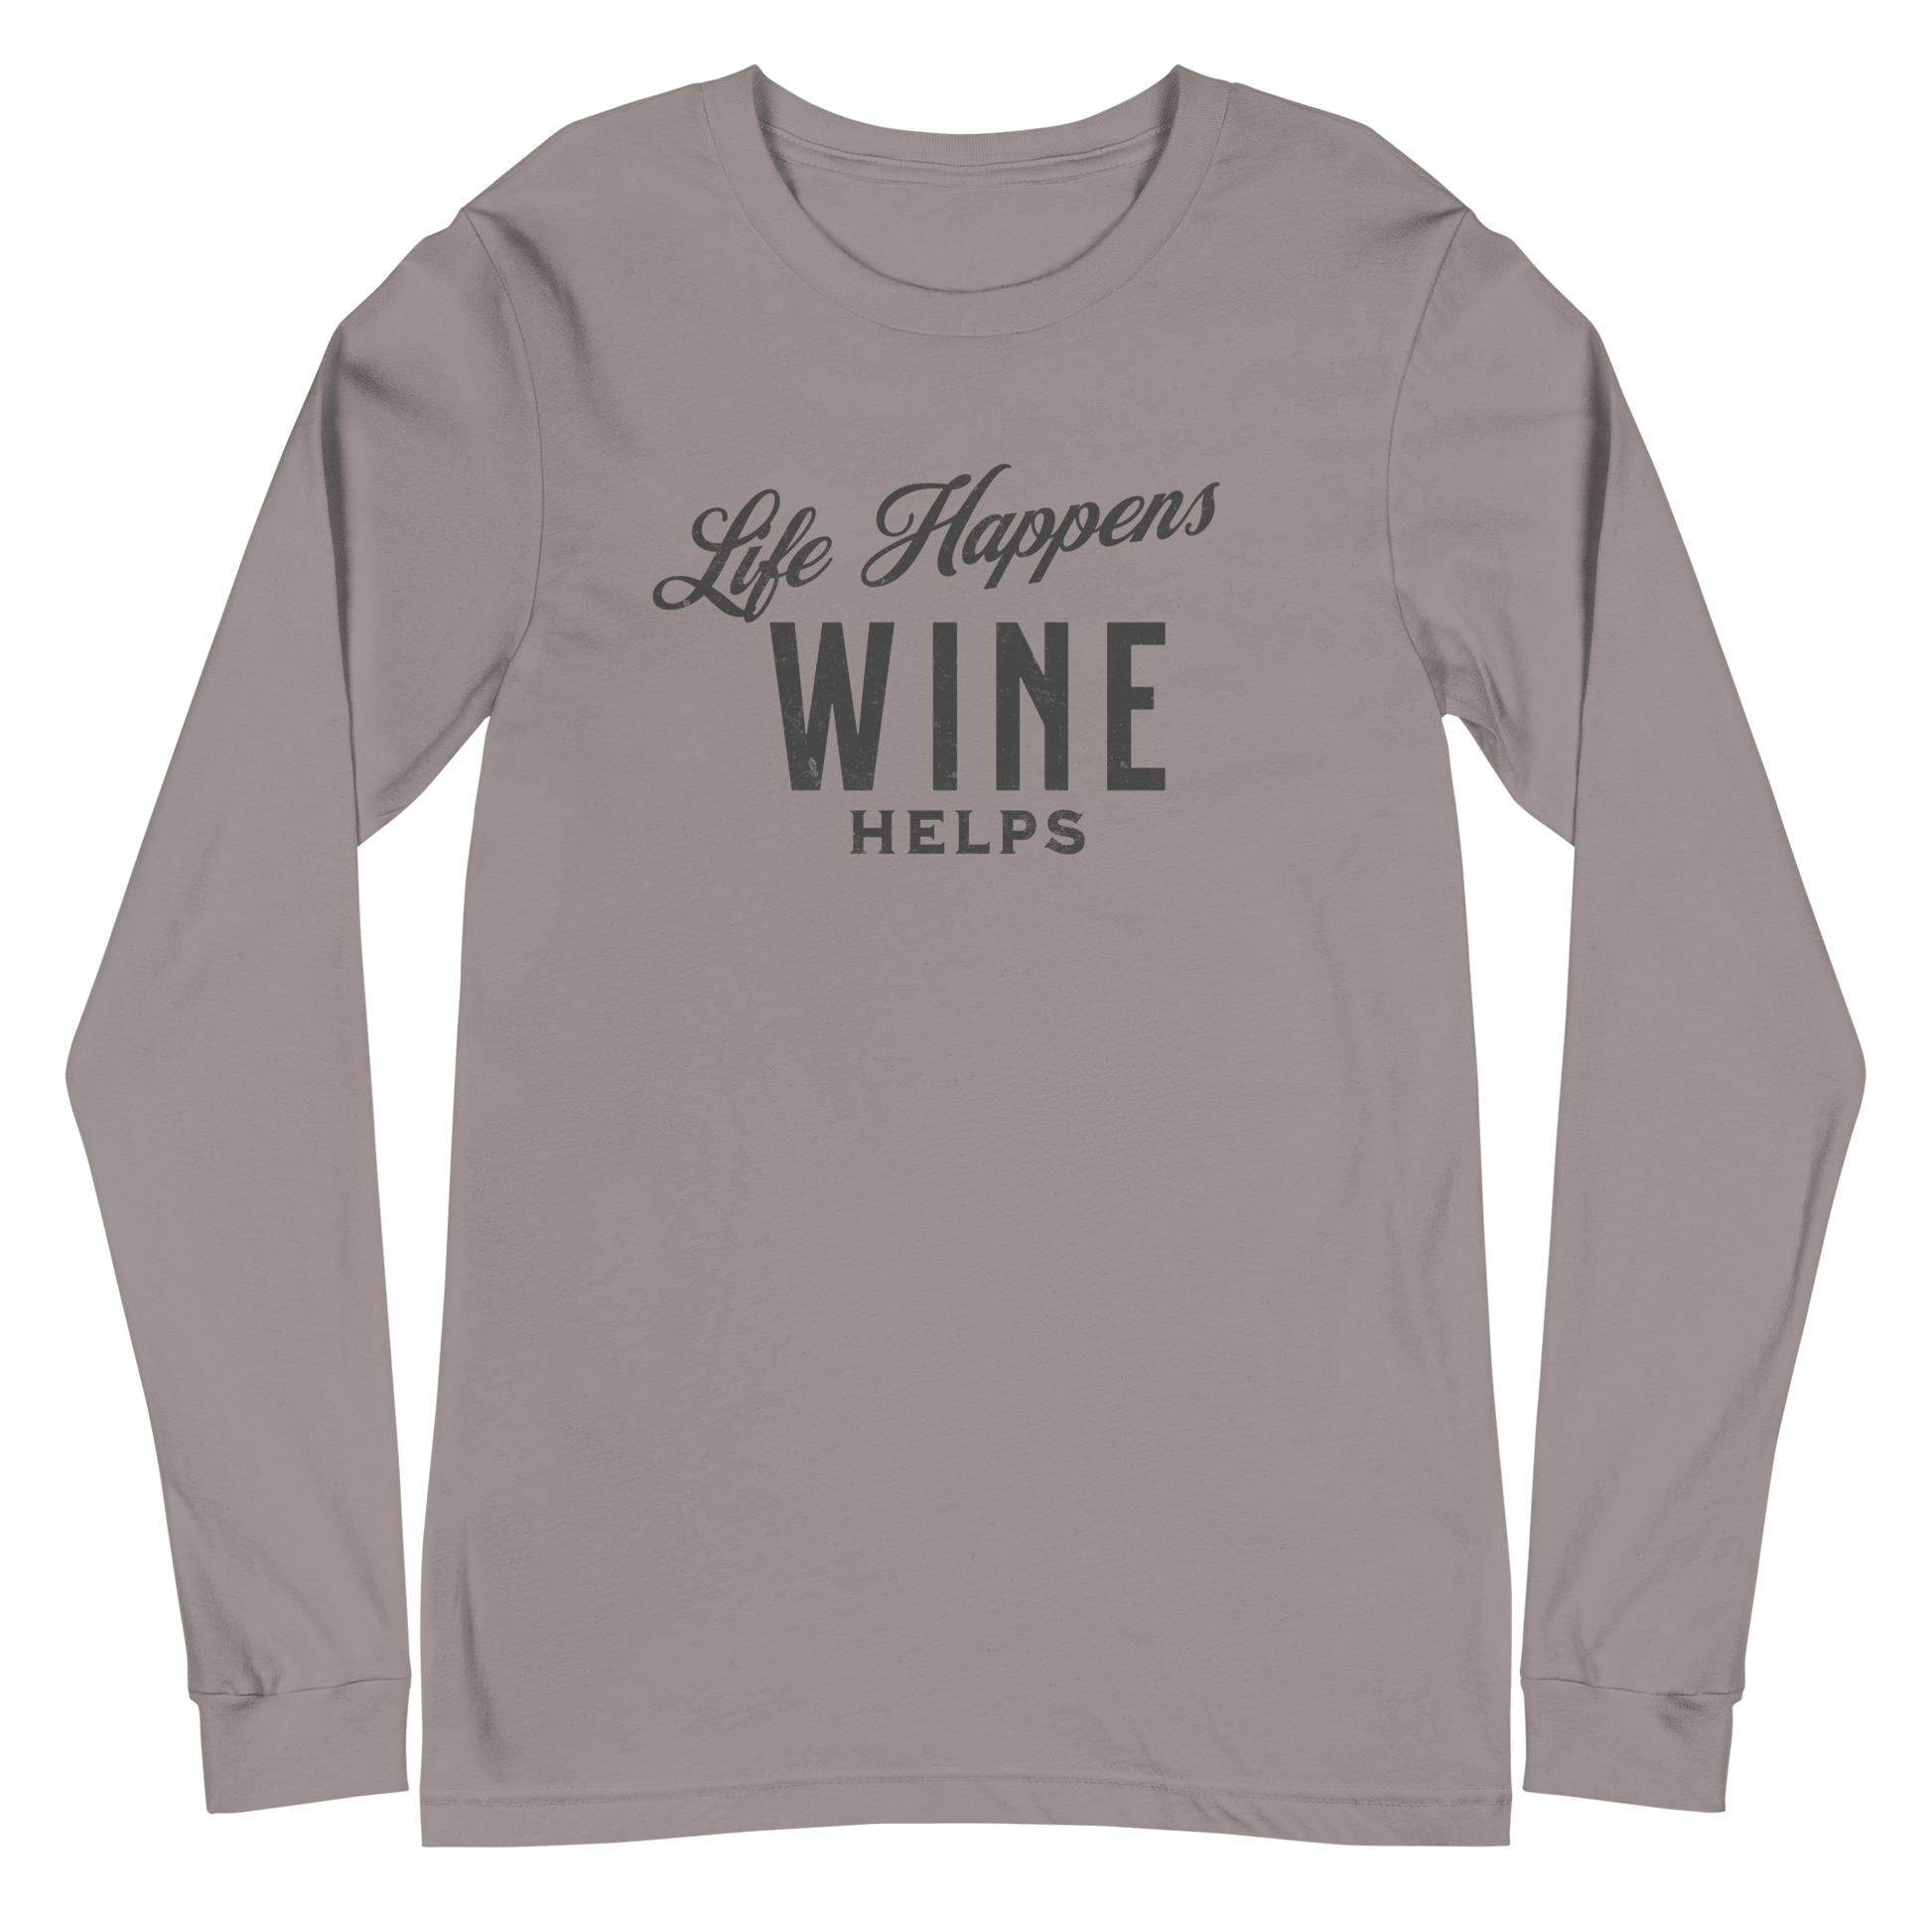 Life Happens Wine Helps Tee - Funny Drinking ApparelAdd fun to your wardrobe with our Life Happens Wine Helps Long Sleeve Tee. Perfect for all occasions. Shop now for a touch of humor and style!